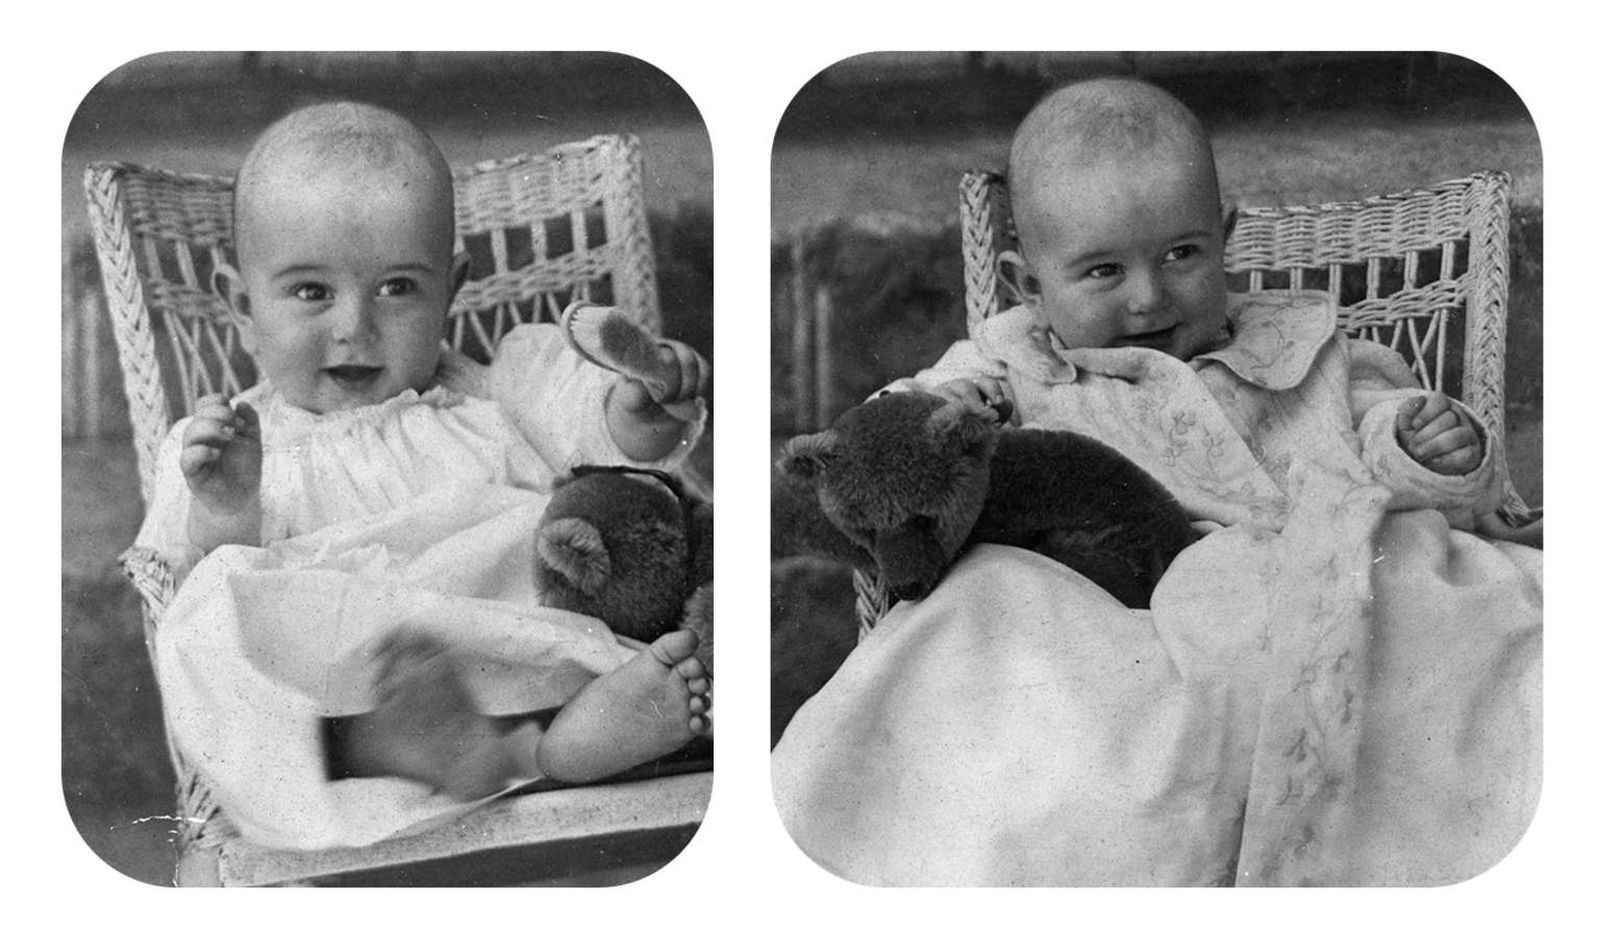 Two photos of a smiling baby sitting in a wicker chair with a teddy bear.